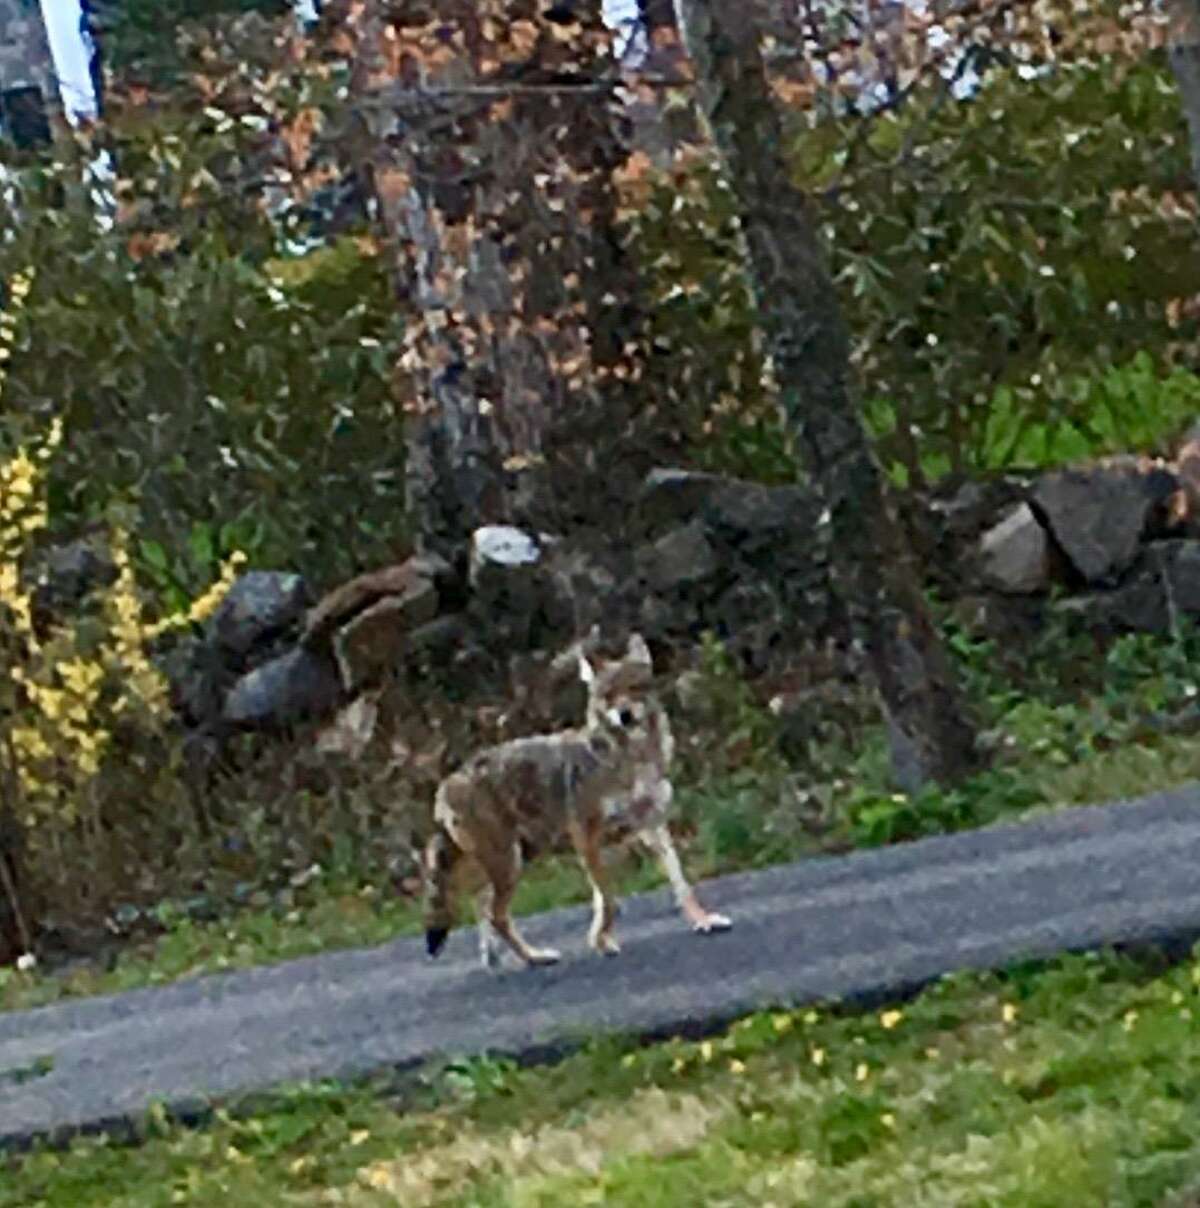 A coyote was spotted in Greenwich on Tuesday.